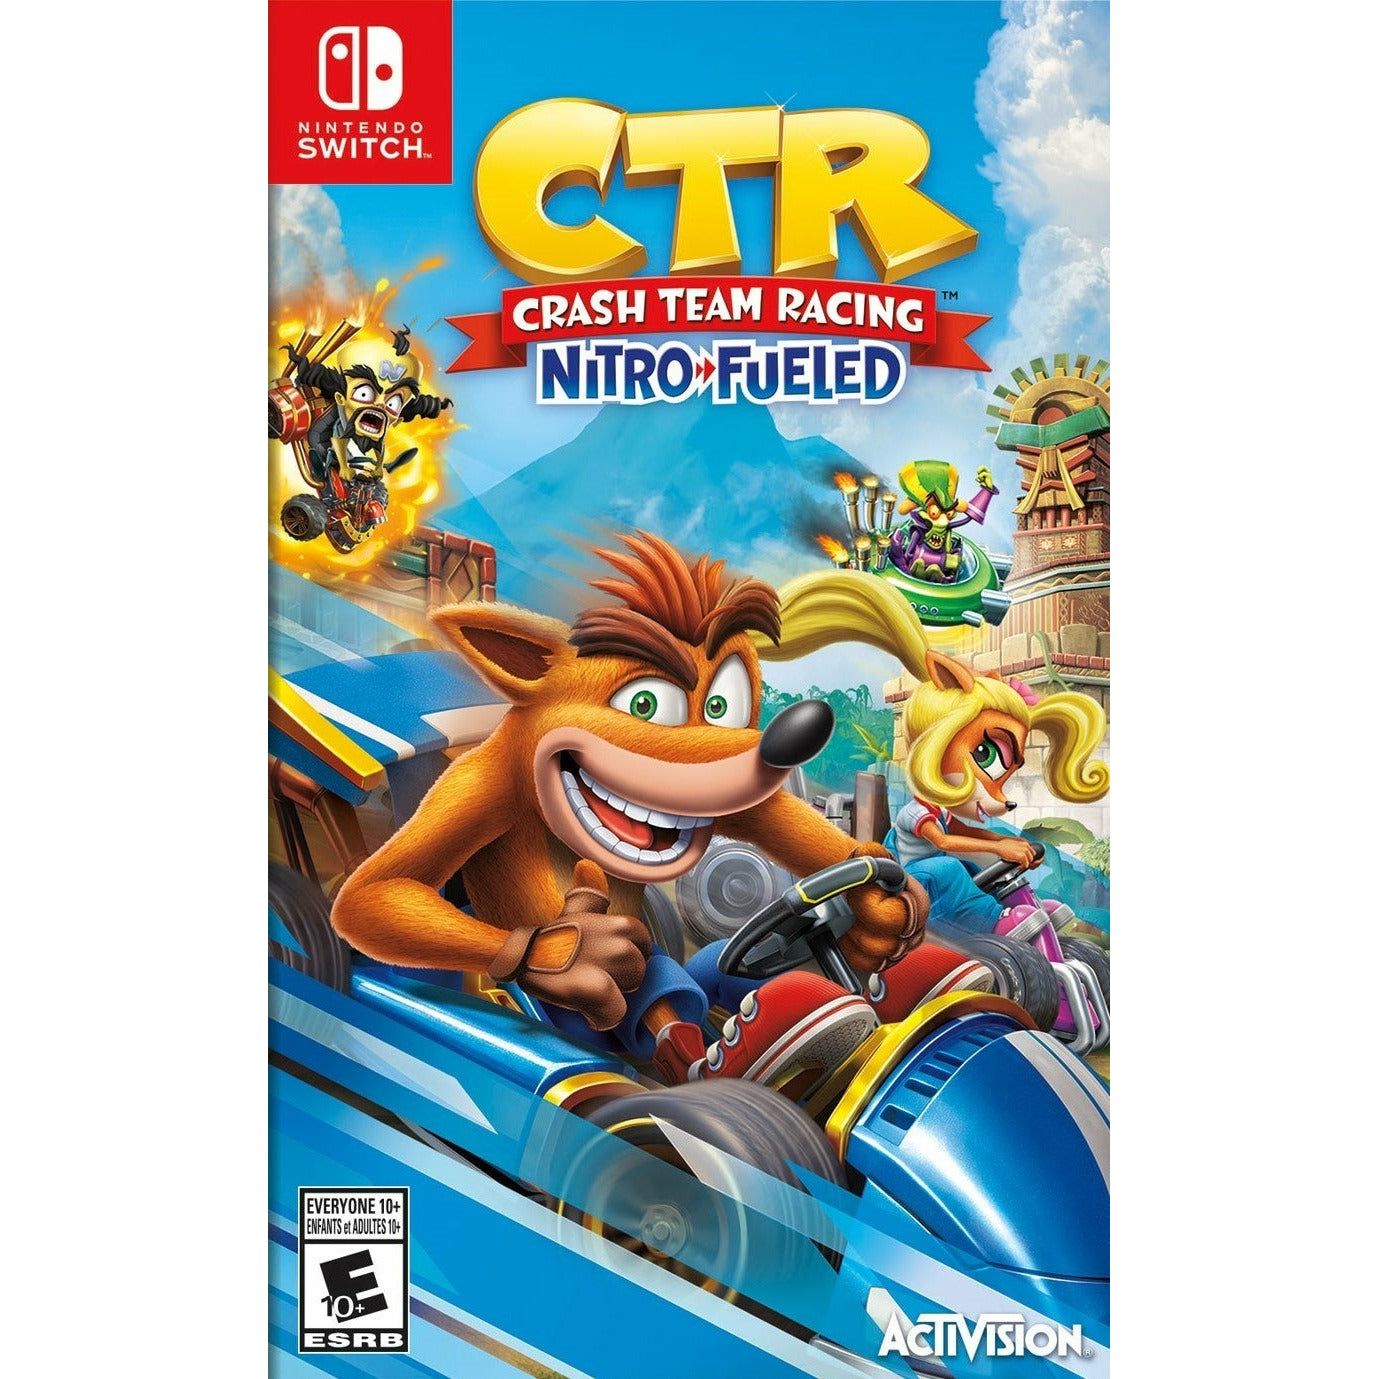 Switch - CTR Crash Team Racing Nitro-Fueled (In Case)